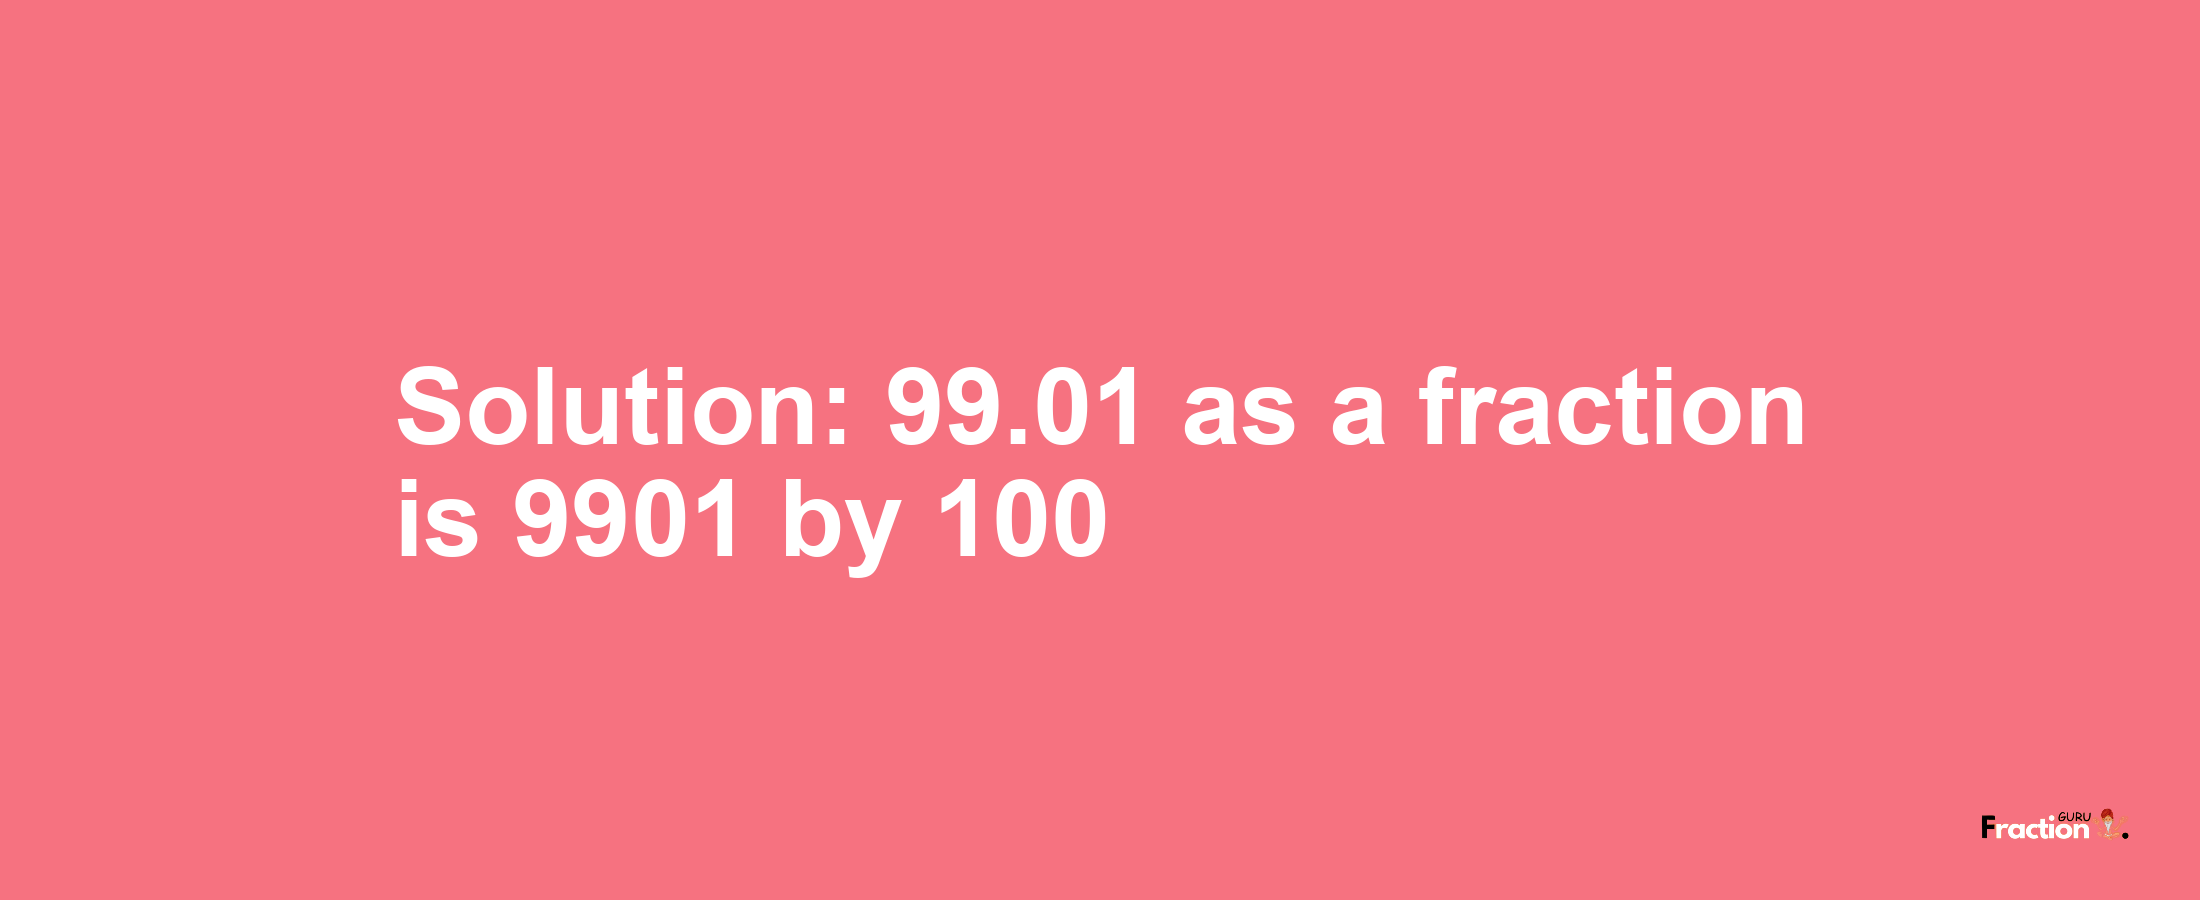 Solution:99.01 as a fraction is 9901/100